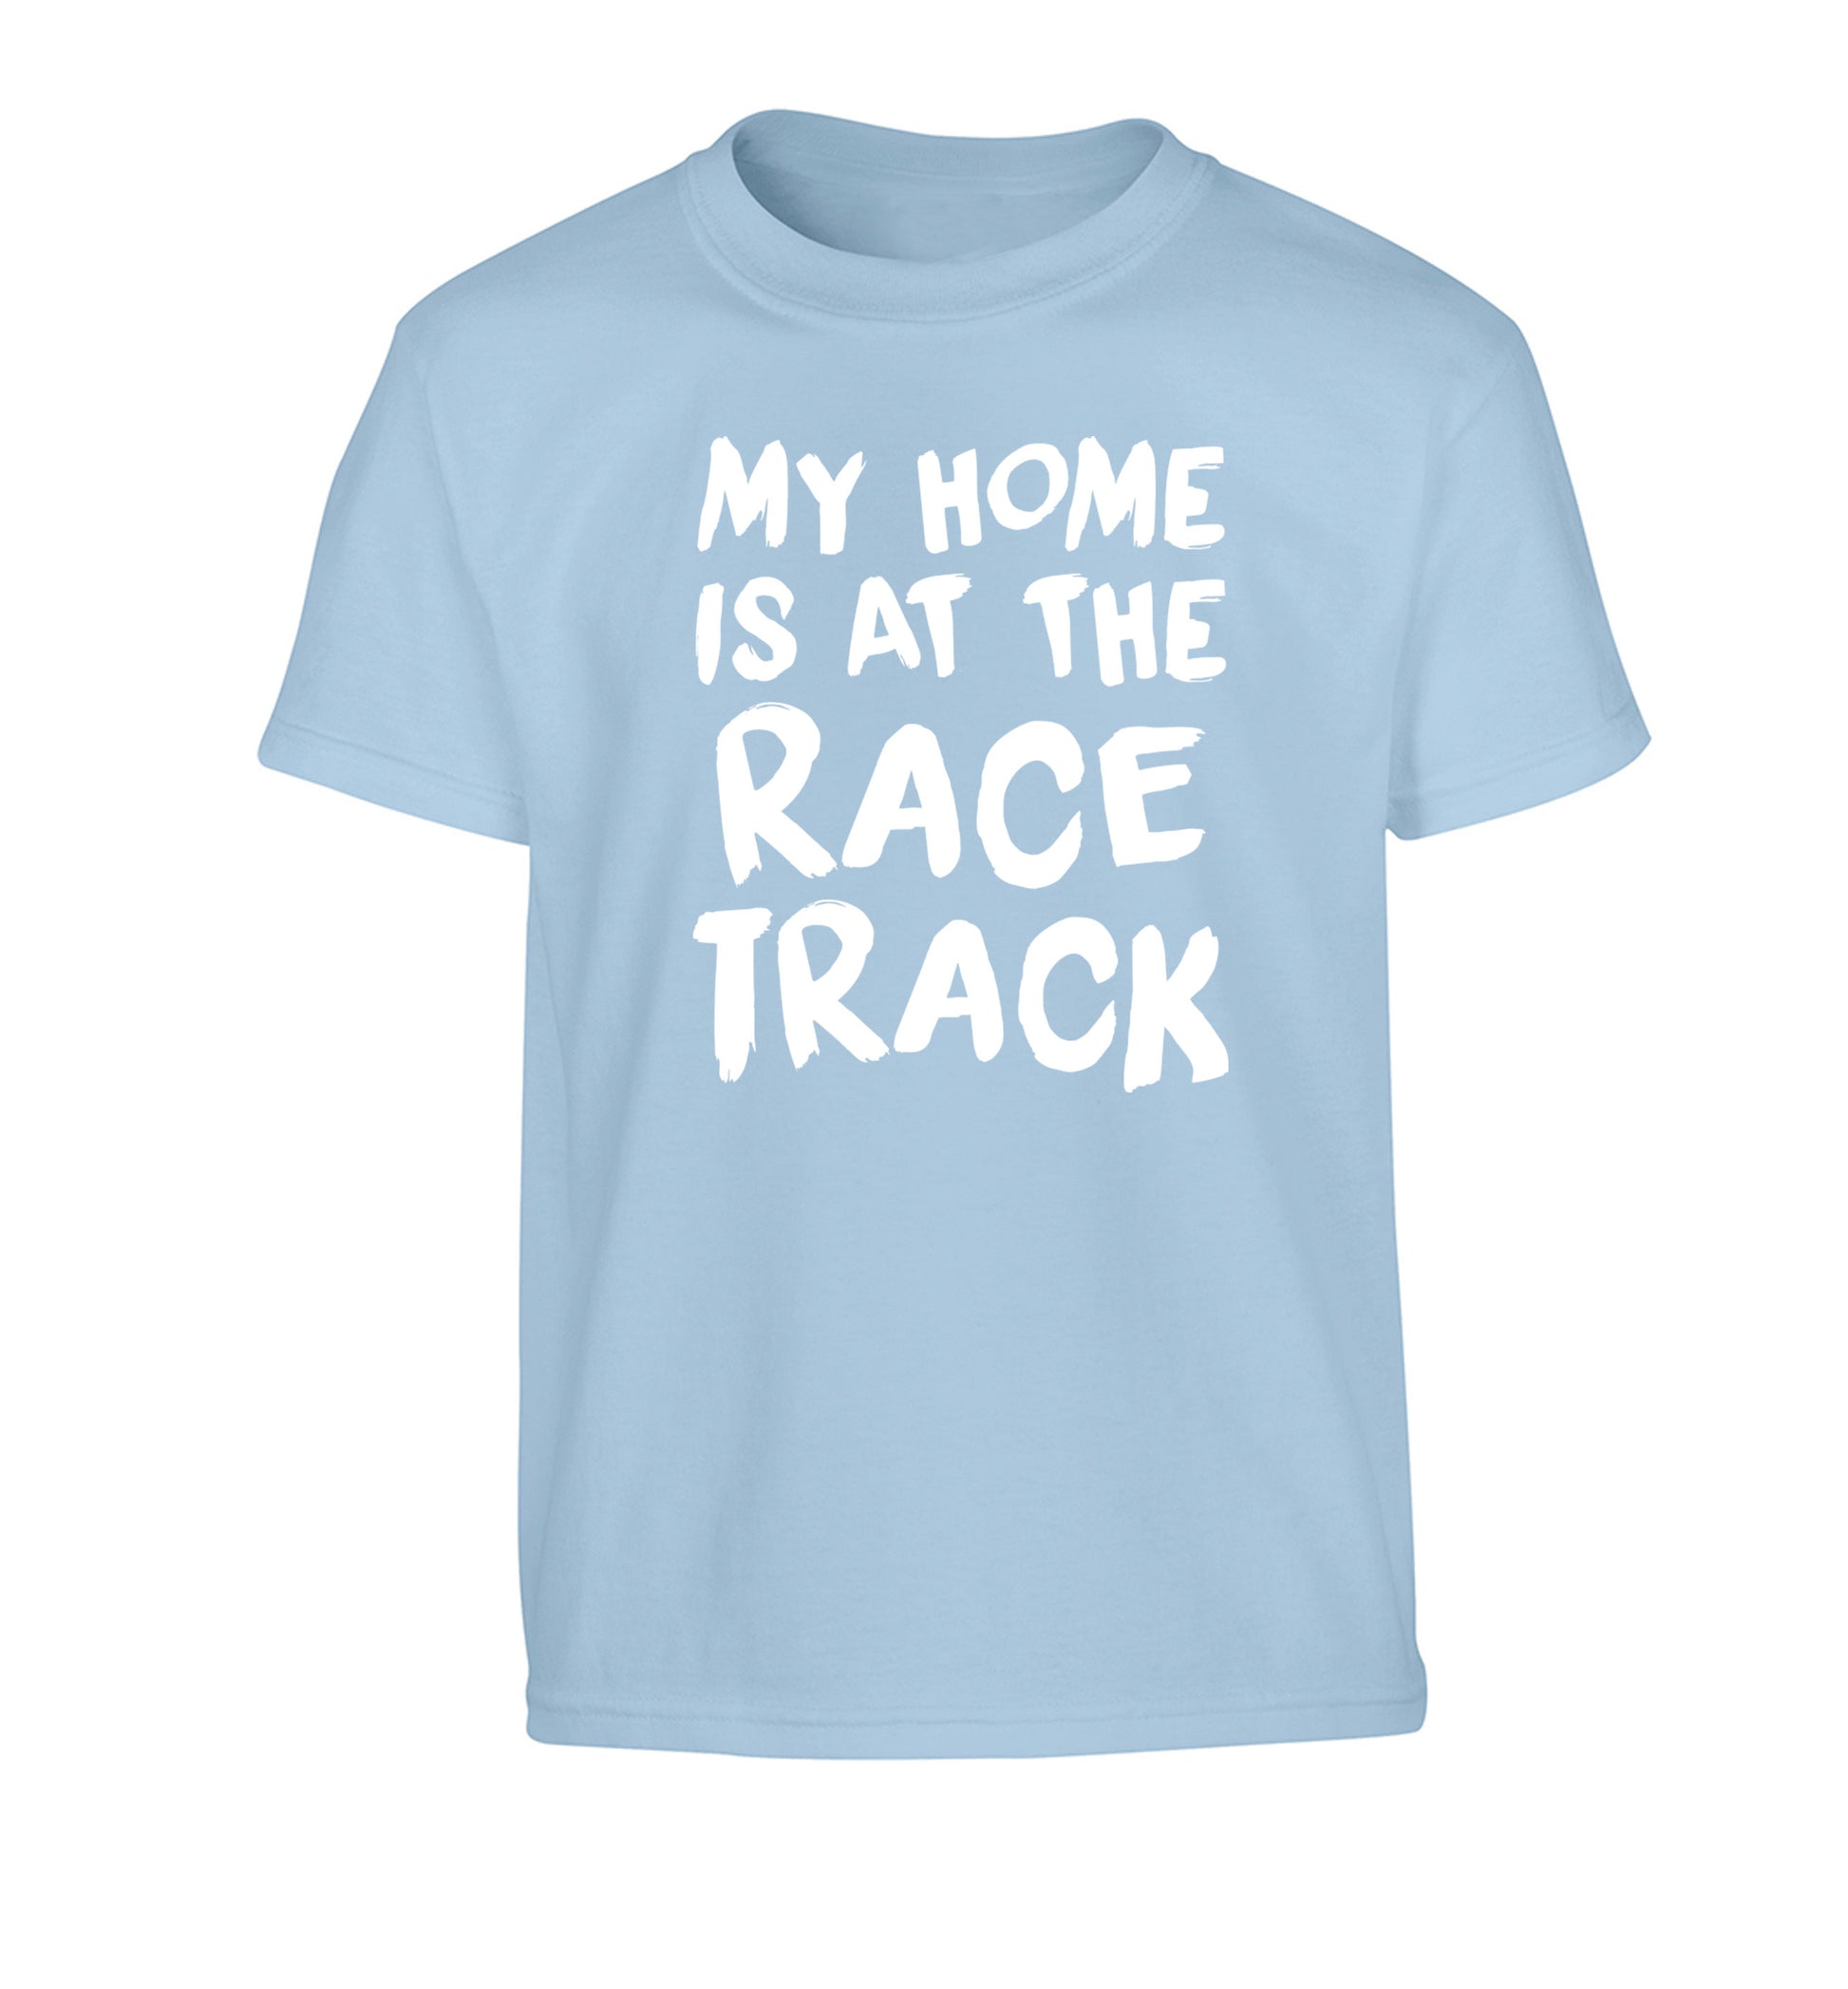 My home is at the race track Children's light blue Tshirt 12-14 Years